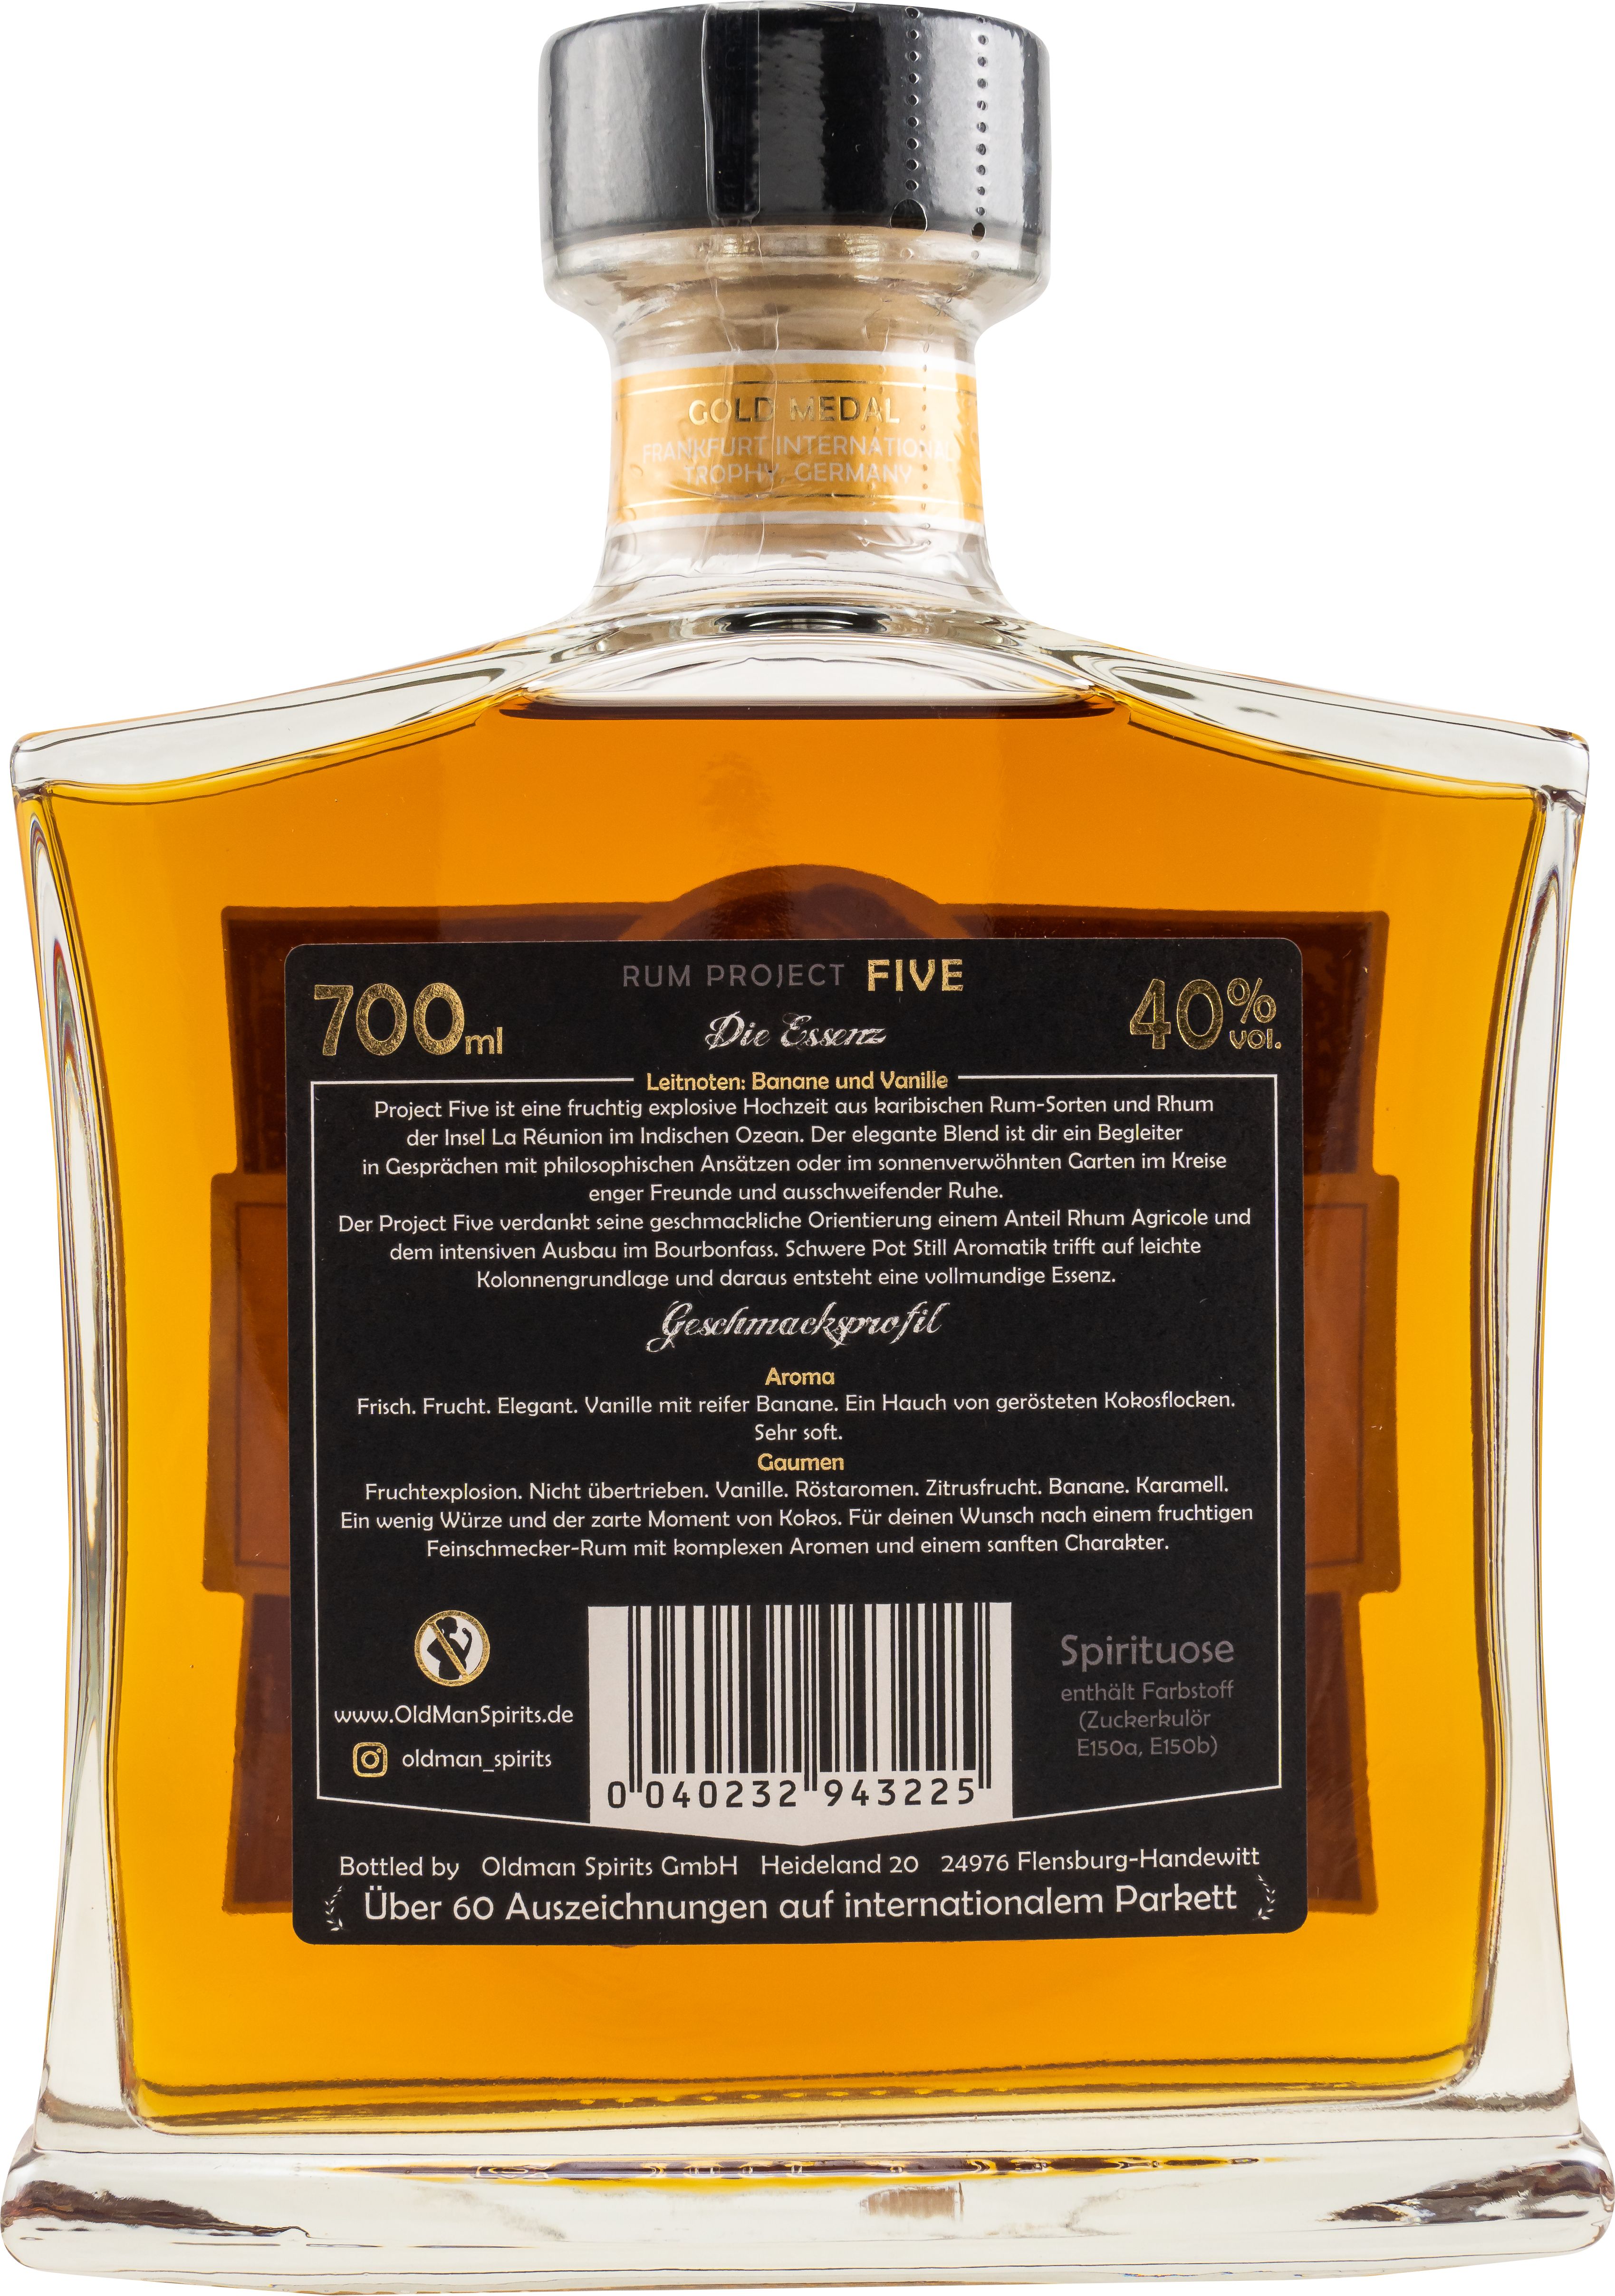 "Rum Project Five" (Leisure Harbour) by Spirits of Old Man 40% 0,7l